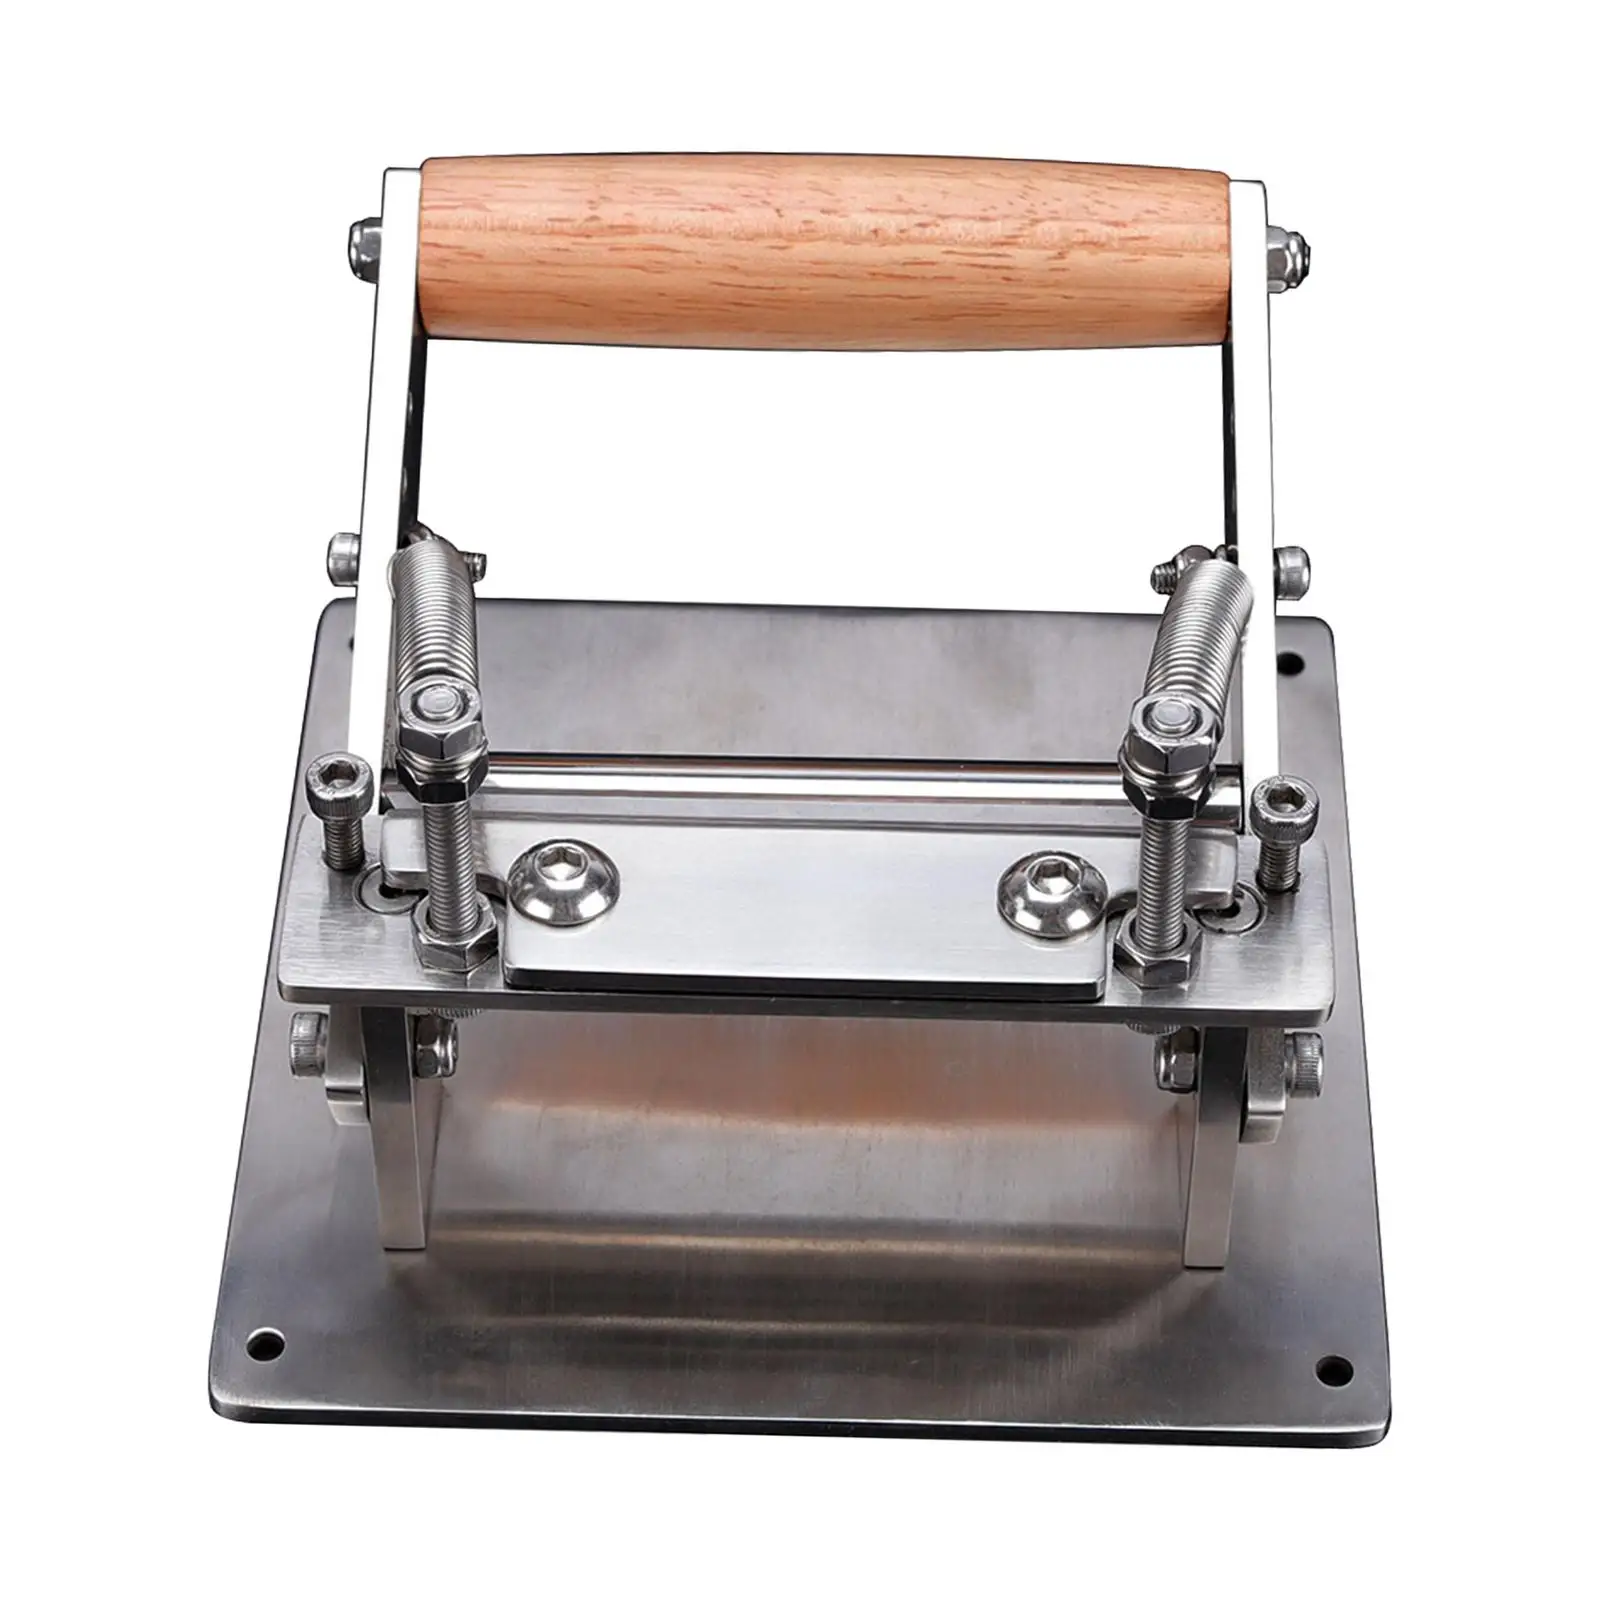 Manual Leather Peeling Machine Leather Thinner Leather Skiver Hand Tool